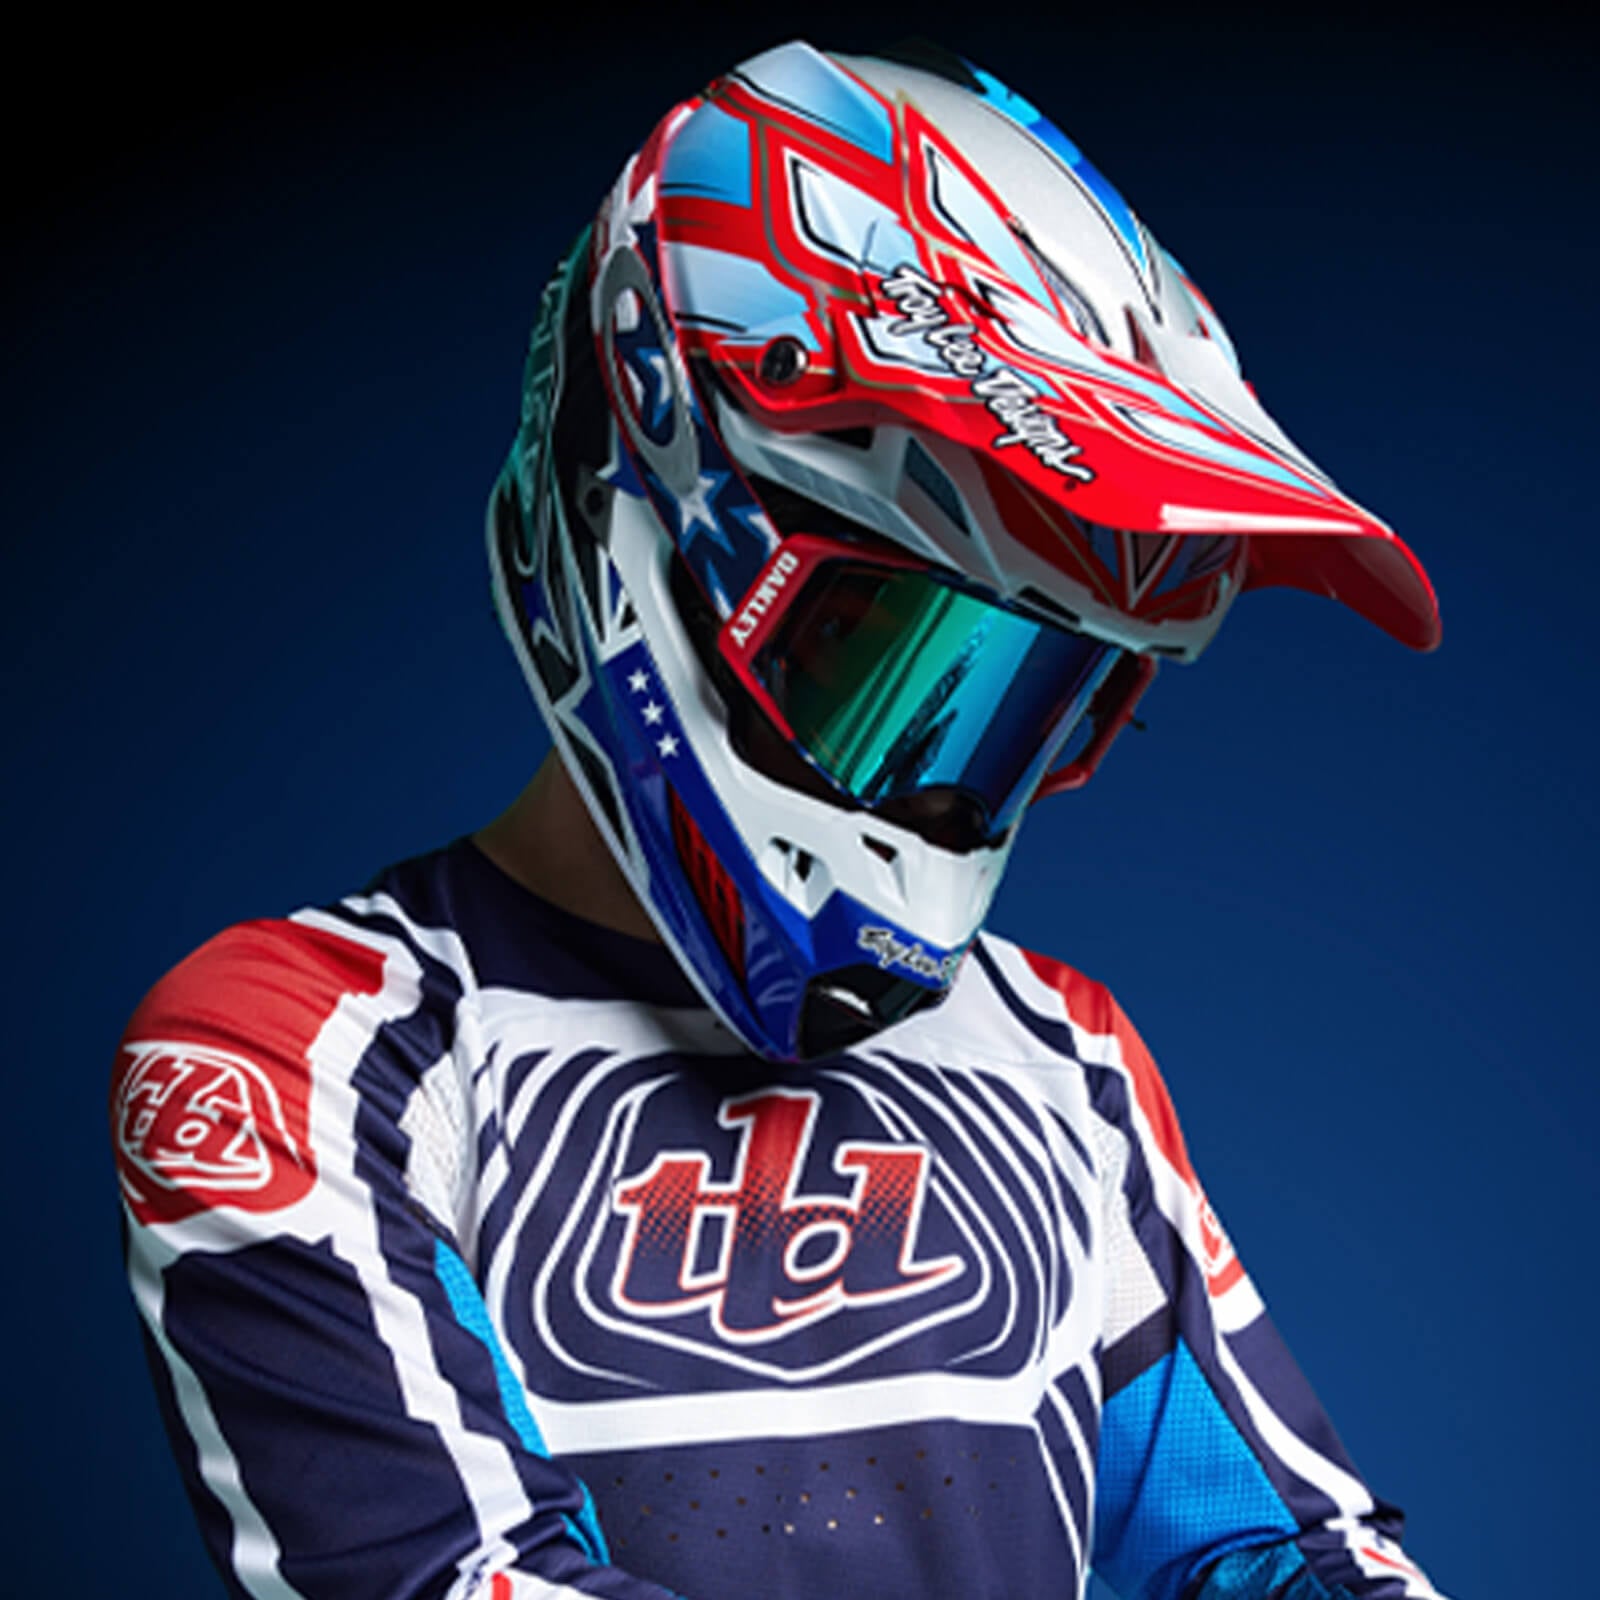 Troy Lee Designs Official - Moto, MTB, Helmets, Gear and Protection – Troy  Lee Designs Canada